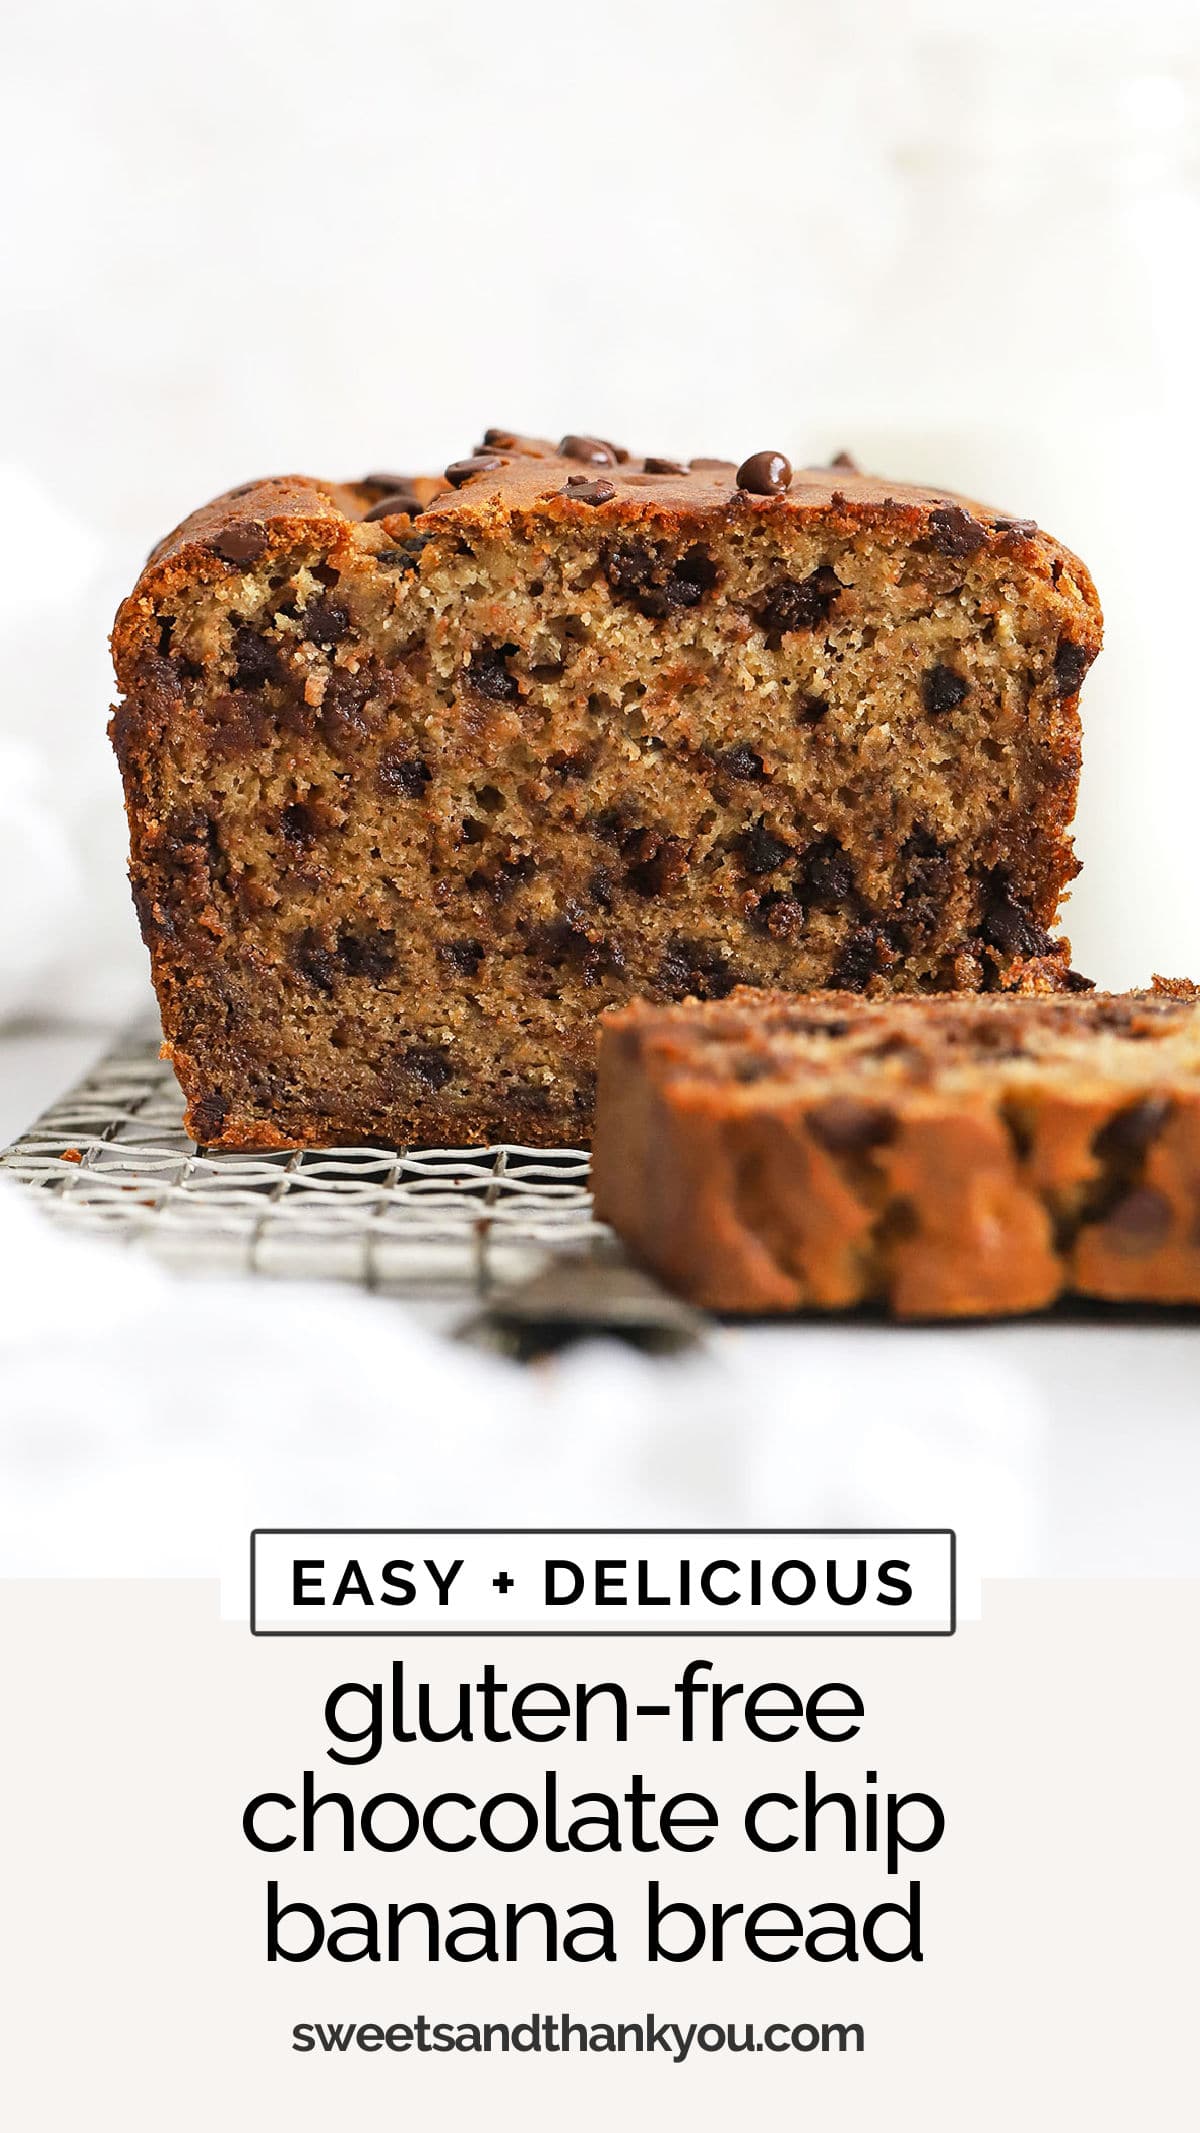 This one-bowl gluten-free chocolate chip banana bread recipe is ultra moist thanks to a few simple ingredients. It's got all the delicious flavor of classic gluten-free chocolate chip banana bread, simply made gluten-free! It's the perfect recipe to use up ripe bananas on your counter! We think the chocolate-banana flavor and soft texture make it the best gluten-free banana bread recipe around! 